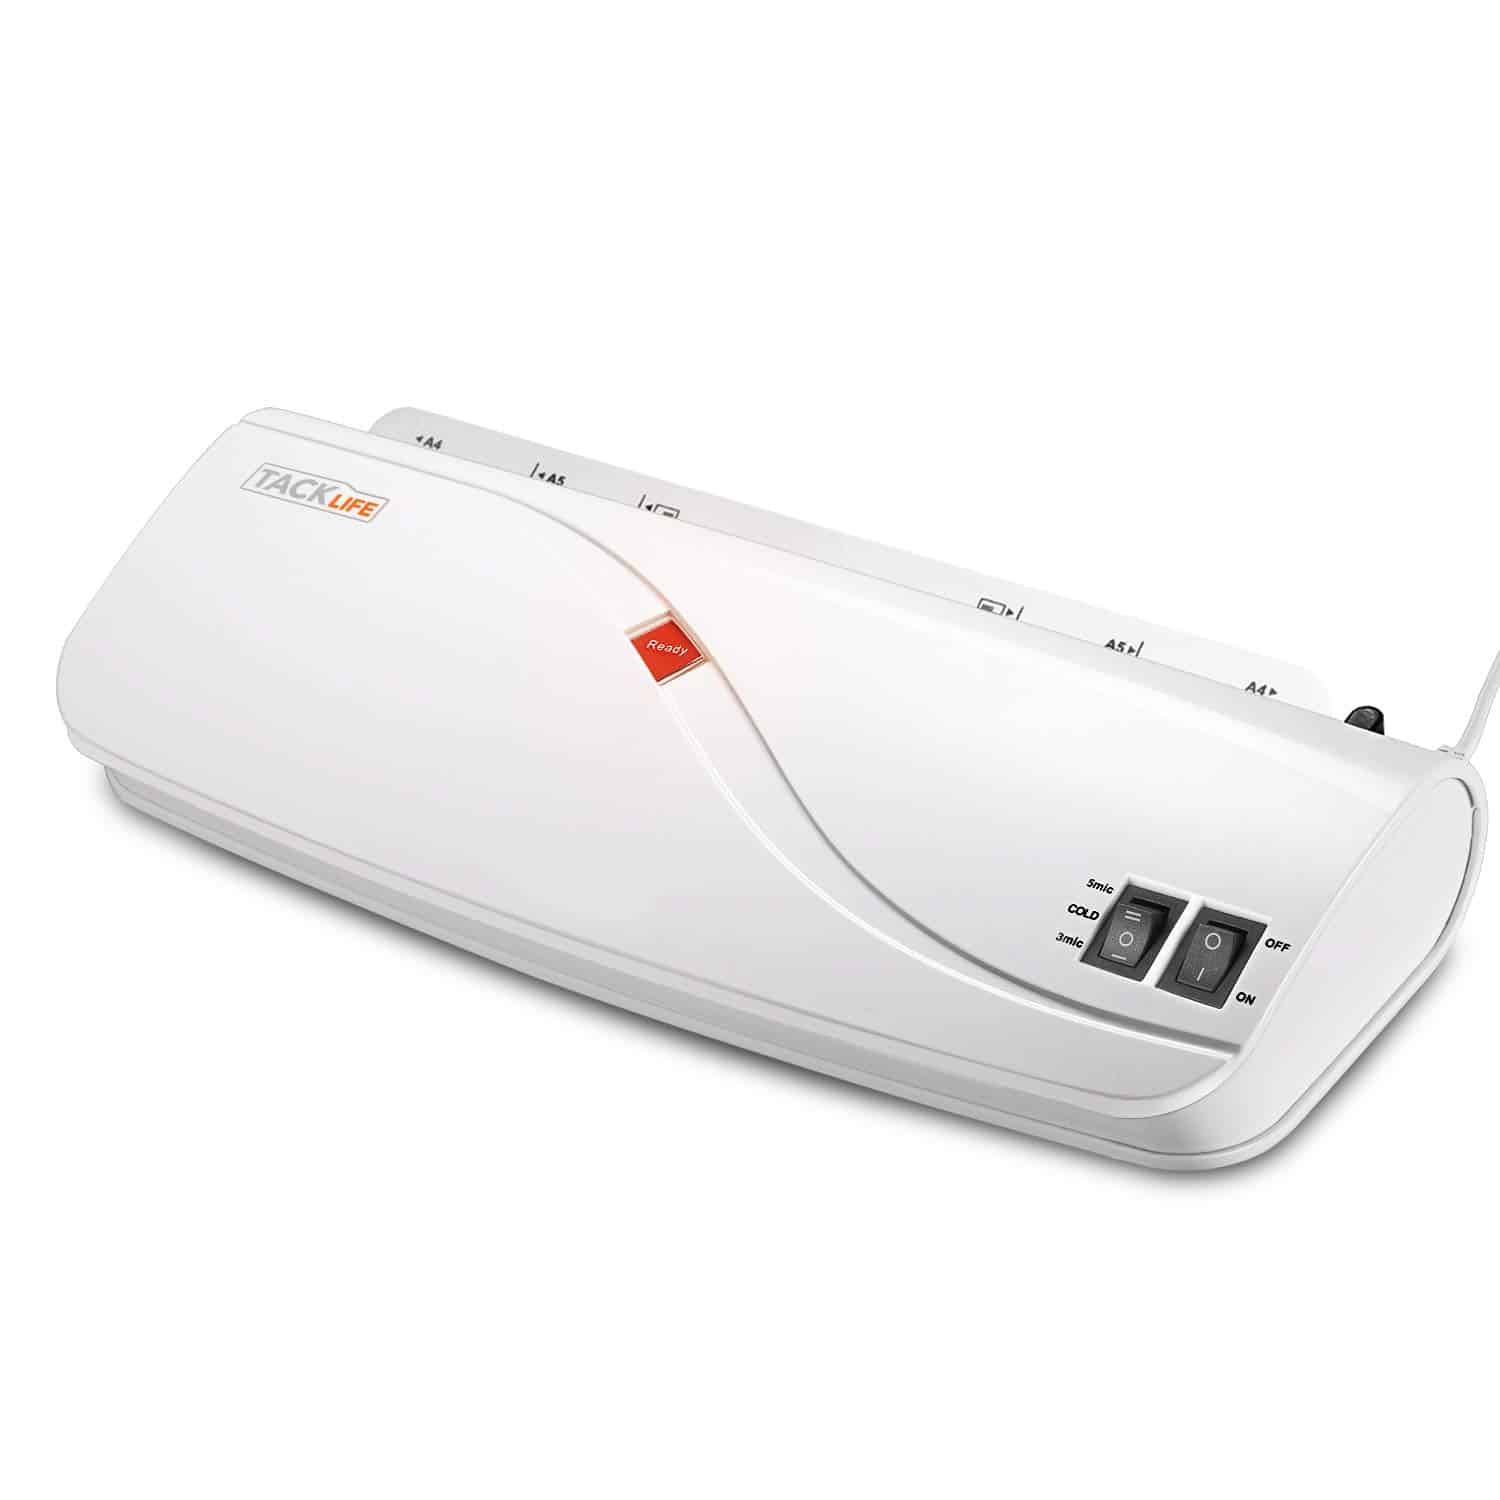 LIGHTNING DEAL ALERT! Thermal Laminator – 48% off with Coupon!